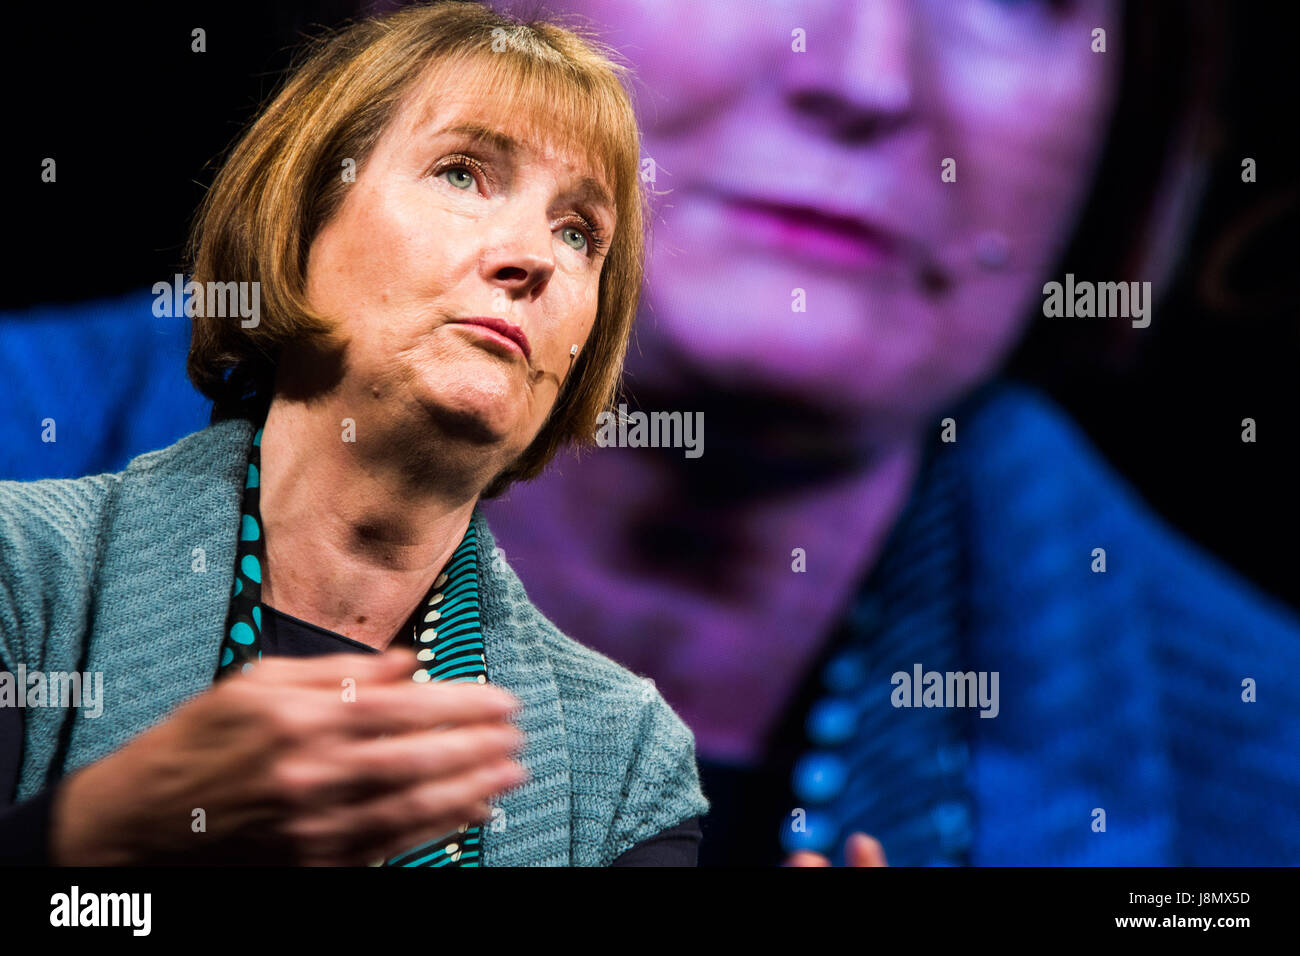 Hay Festival, Wales UK, Monday 29 May 2017 Former leading Labour politician HARRIET HARMAN talking about her life and work at the Hay Festivl 2017 Now in its 30th year, the festival draws tens of thousand of visitors a day to what was described by former US president Bill Clinton as 'the woodstock of the mind' Photo credit Credit: keith morris/Alamy Live News Stock Photo